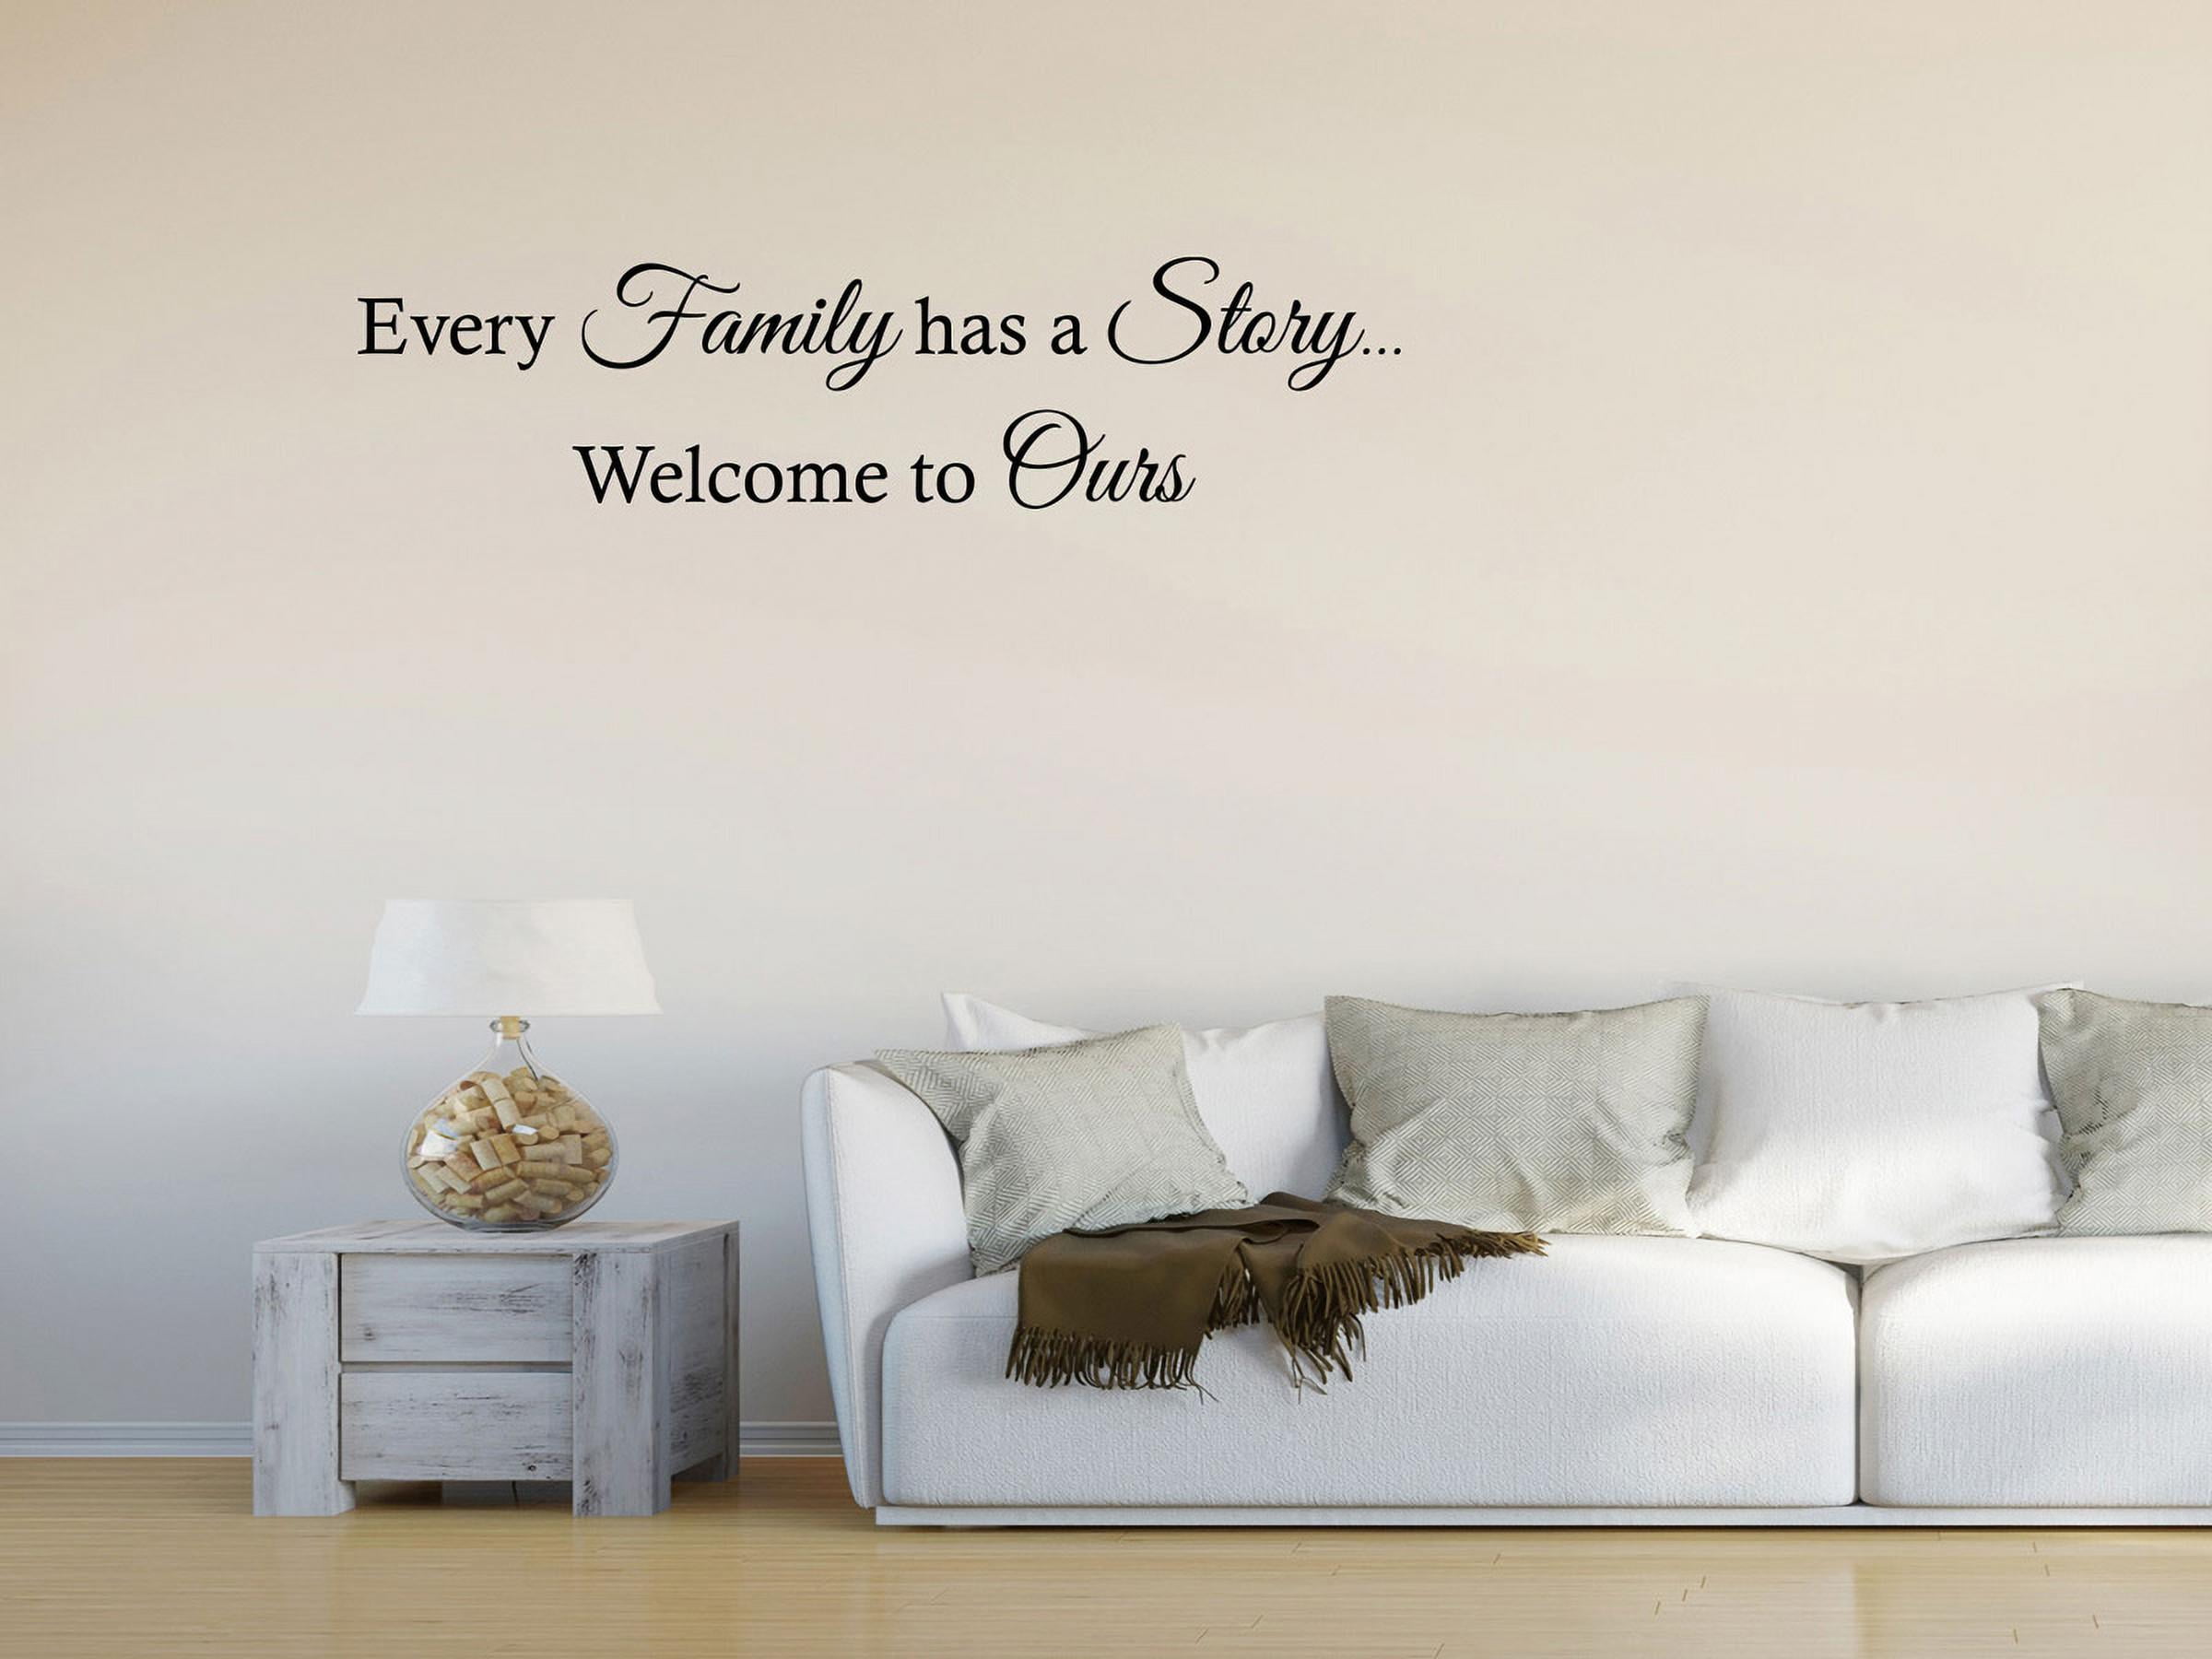 Every family has a story inspirational quote Wall Decal Sticker kitchen vinyl 78